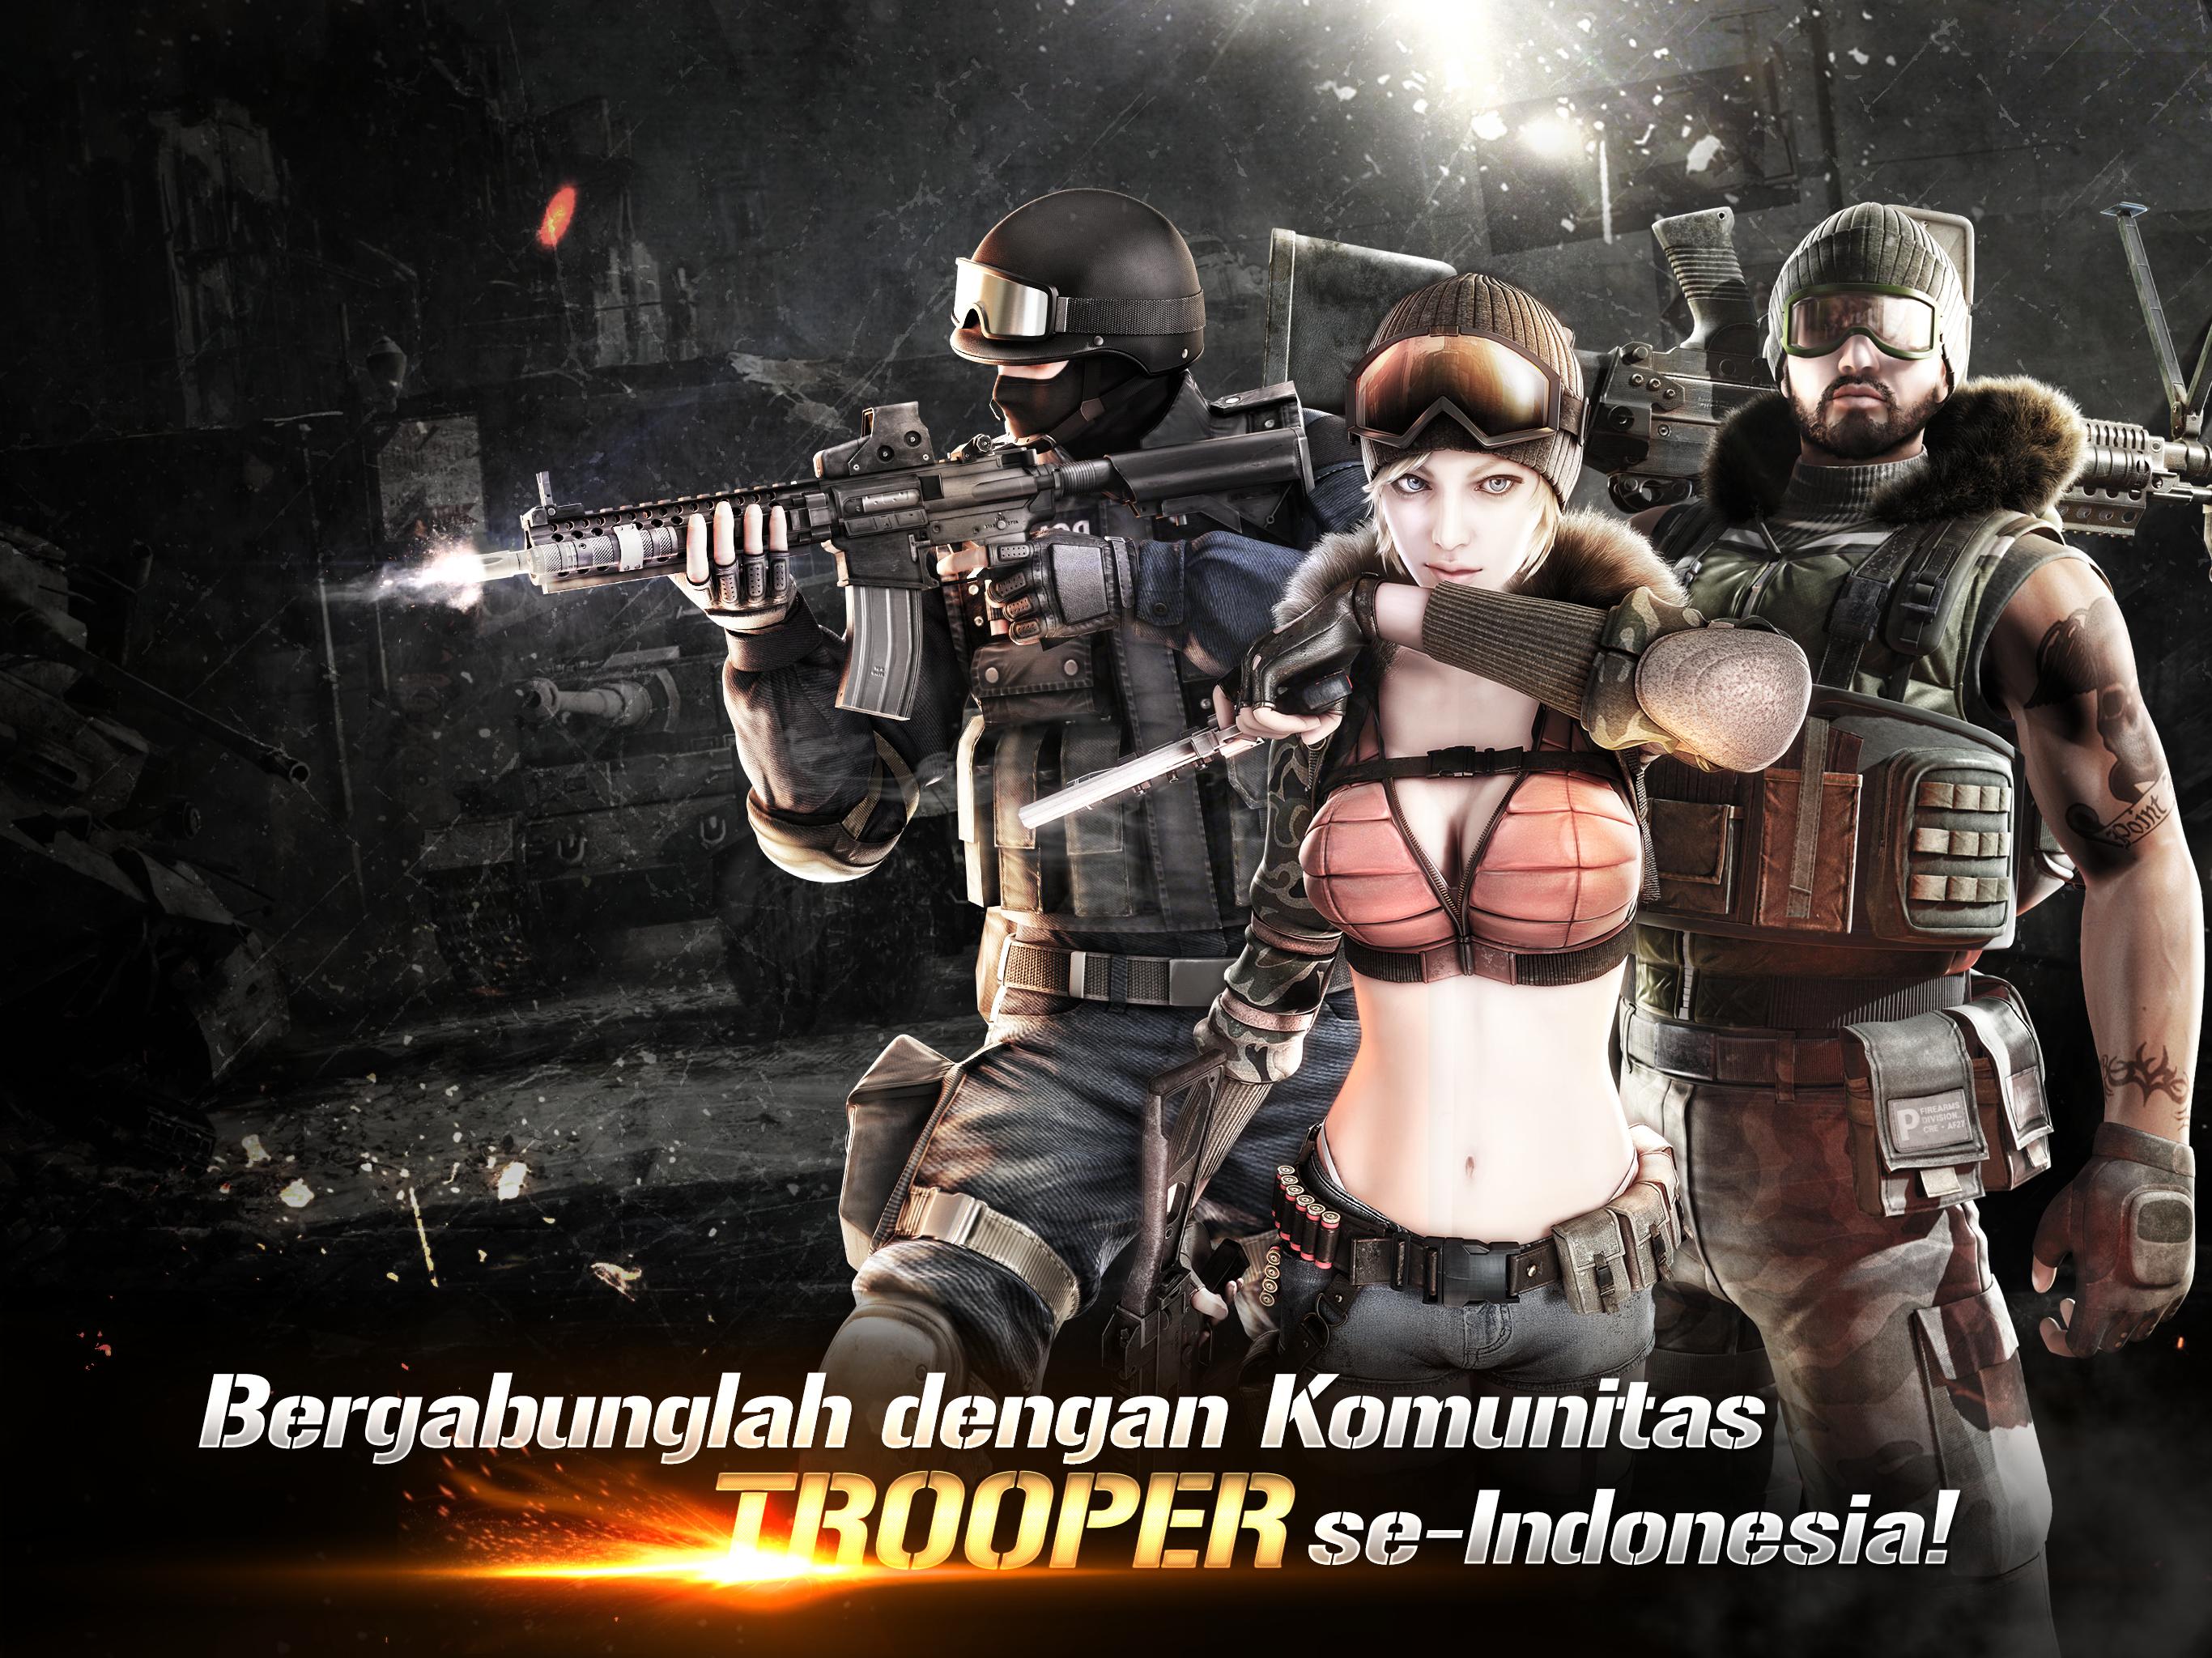 Point Blank Mobile for Android APK Download